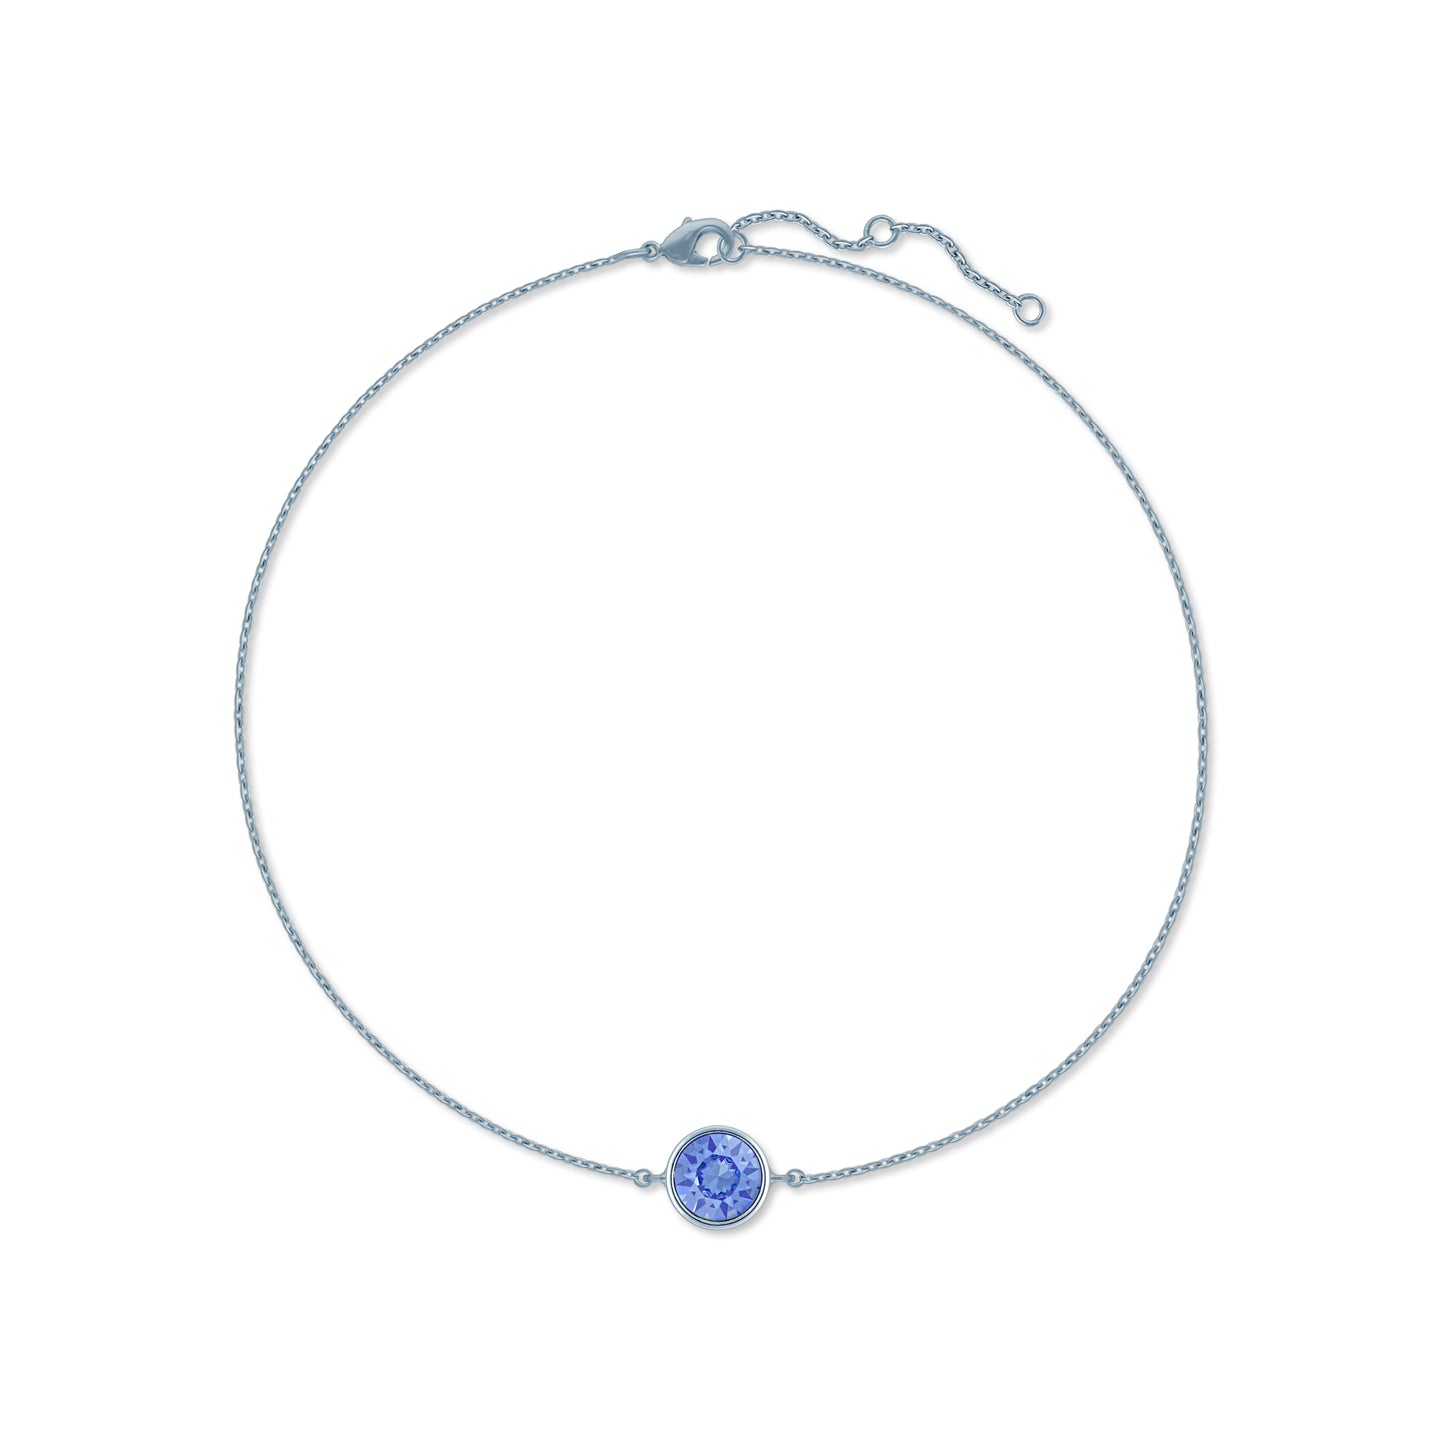 Harley Chain Bracelet with Blue Light Sapphire Round Crystals from Swarovski Silver Toned Rhodium Plated - Ed Heart